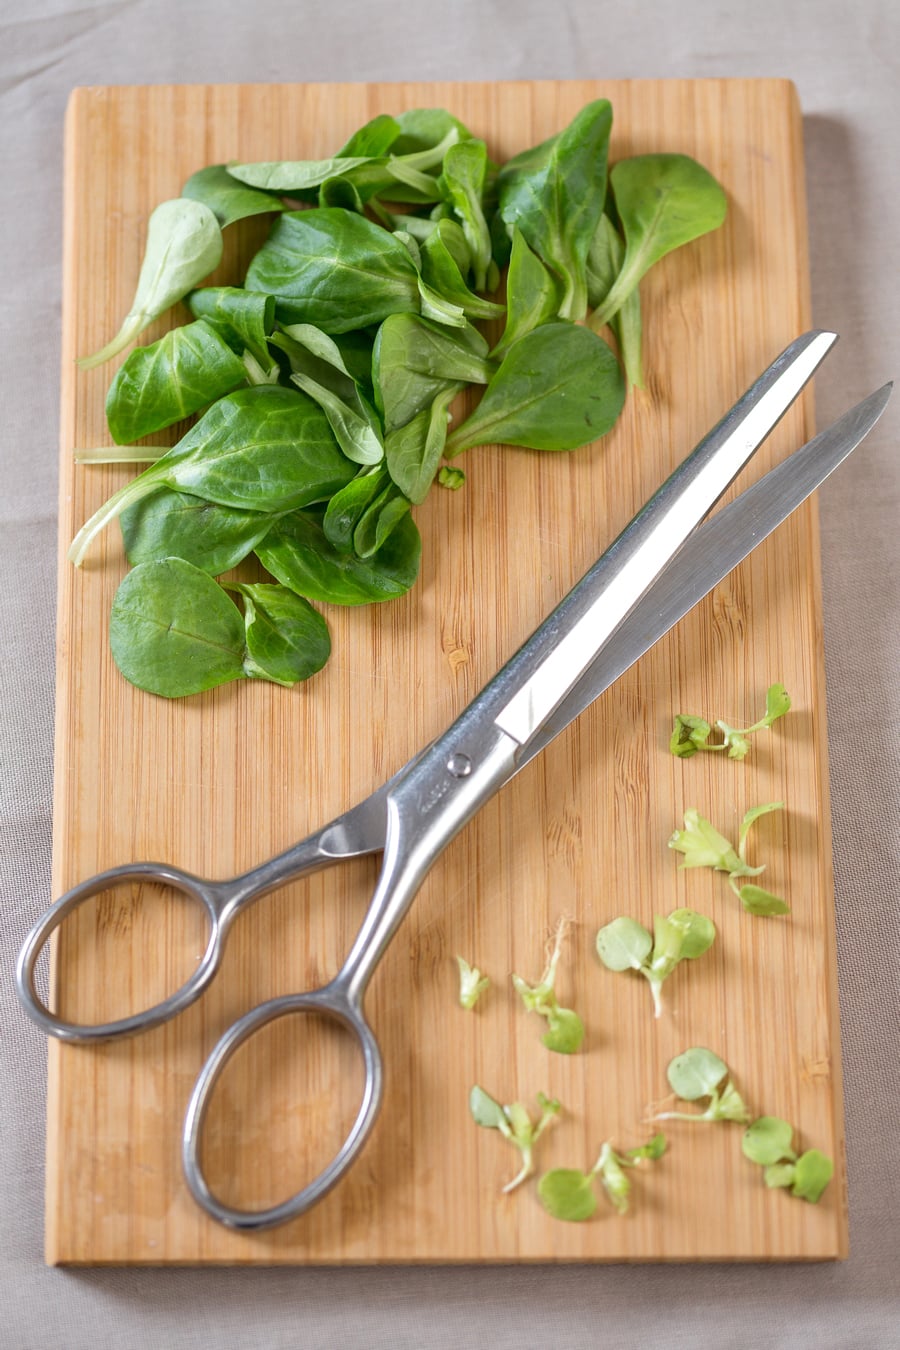 Mâche salad leaves separated from roots, scissors in between.